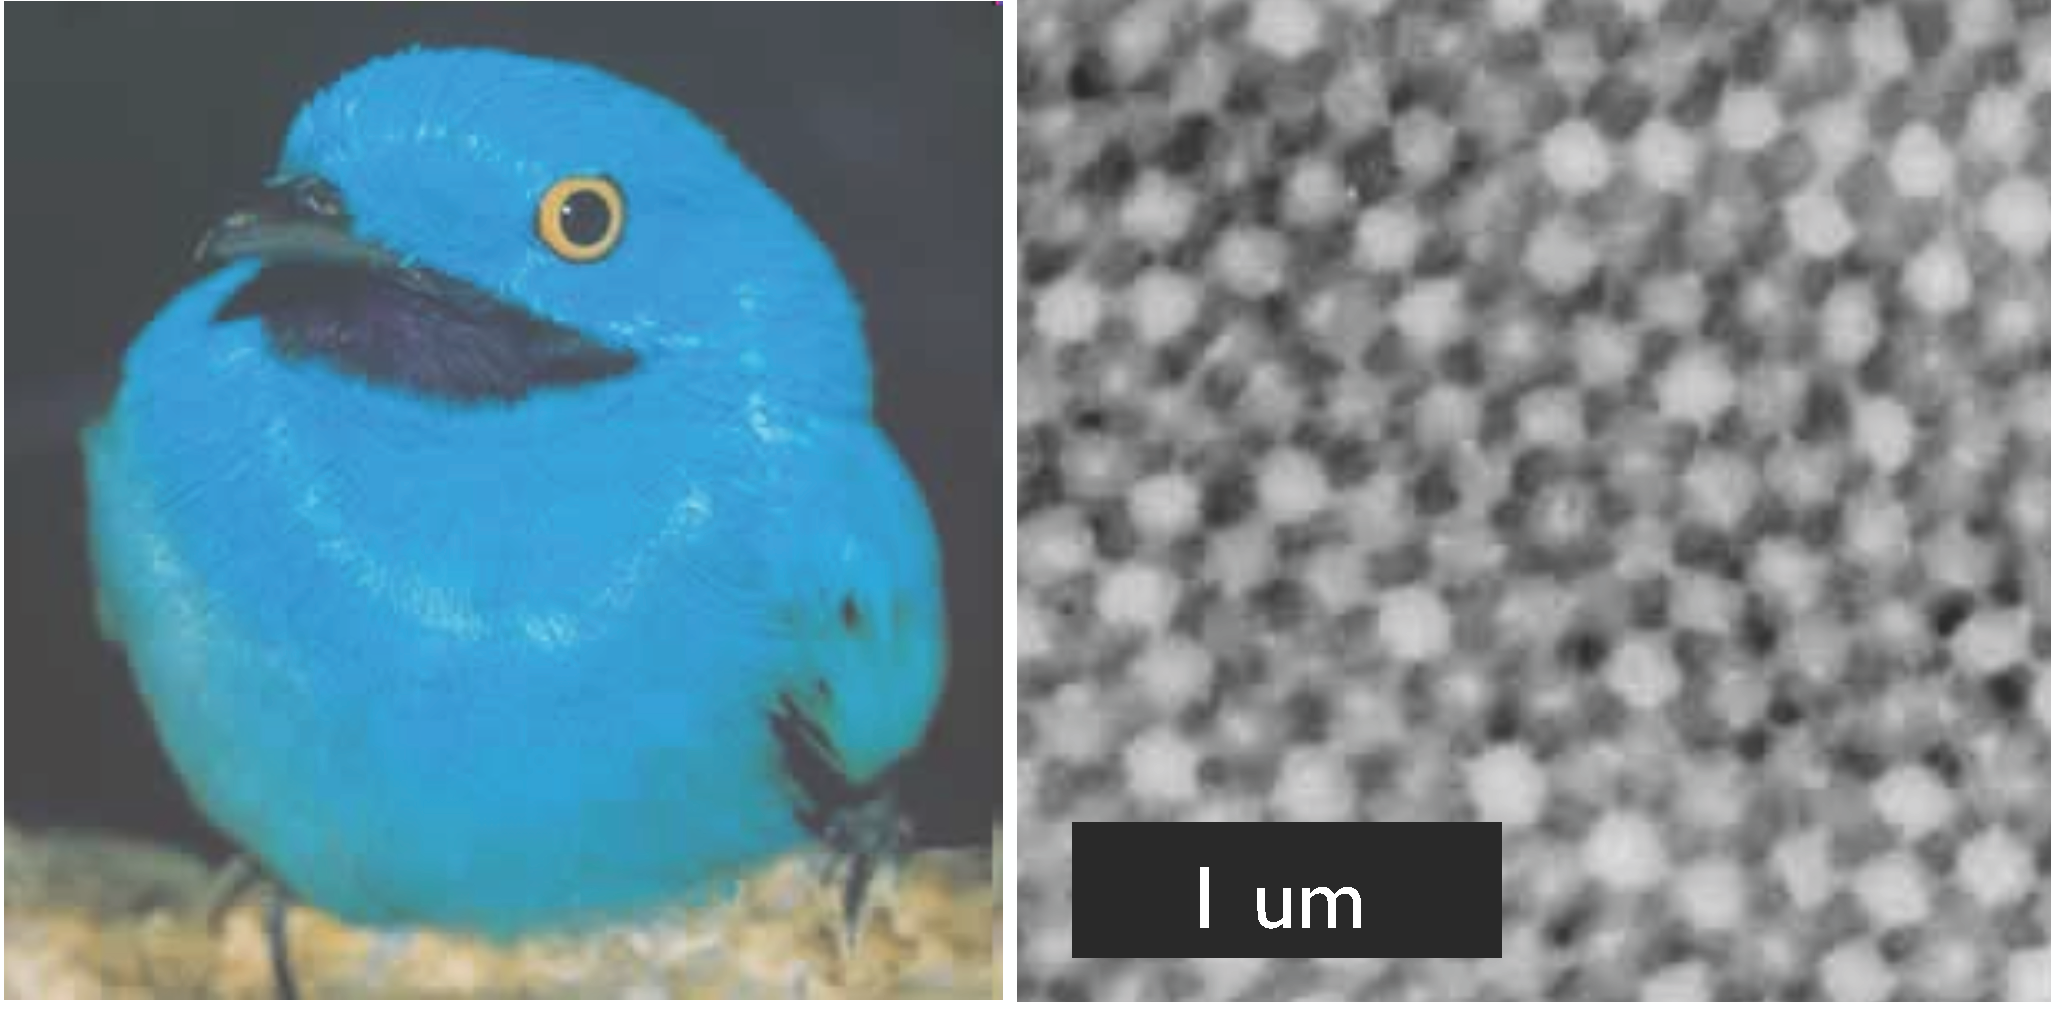 Structural colour in a bird